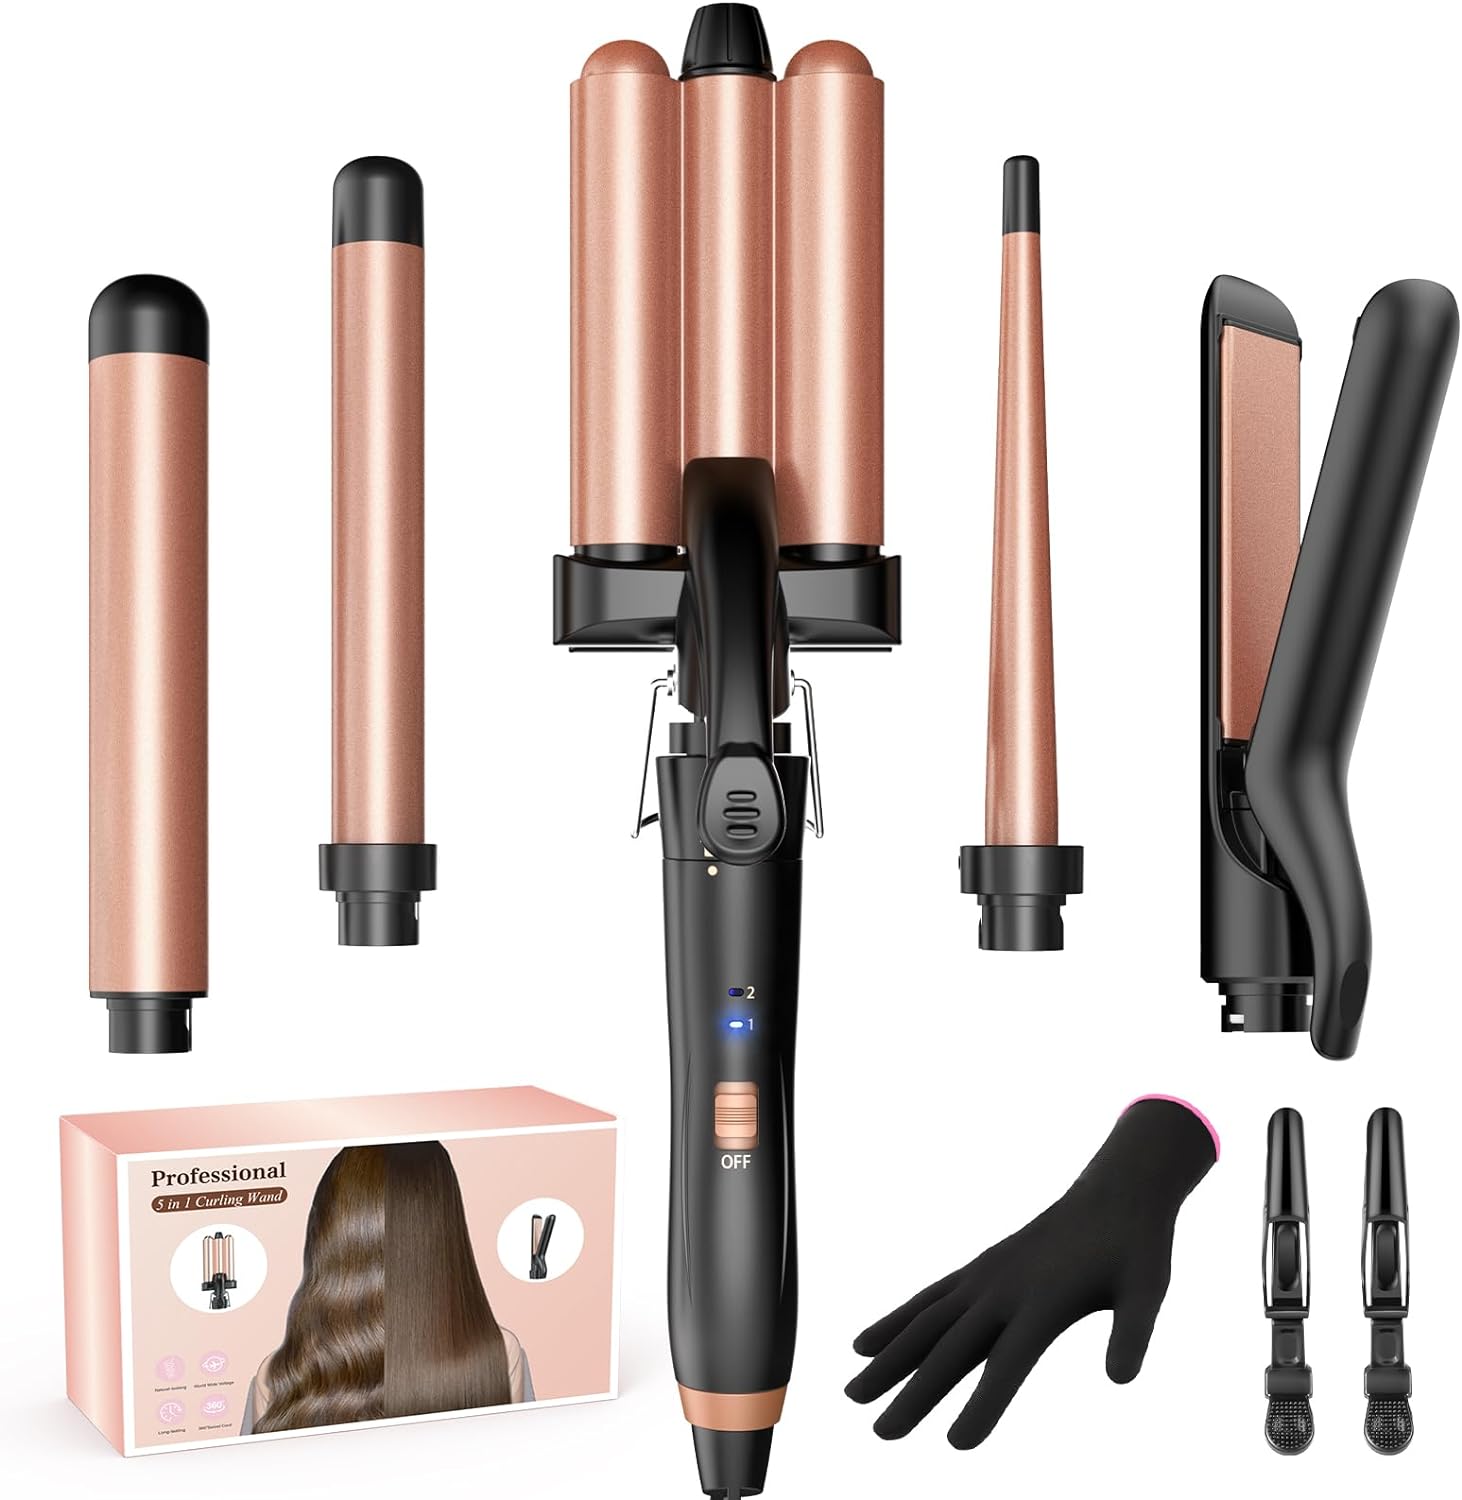 Curling Iron, 3 Barrels, Wave Iron, 5-in-1 Bestope Mix Hair Curler with Hair Straightener, Wave Iron for Hair, Adjustable Temperature, Curling Iron with Glove and 2 Clips
